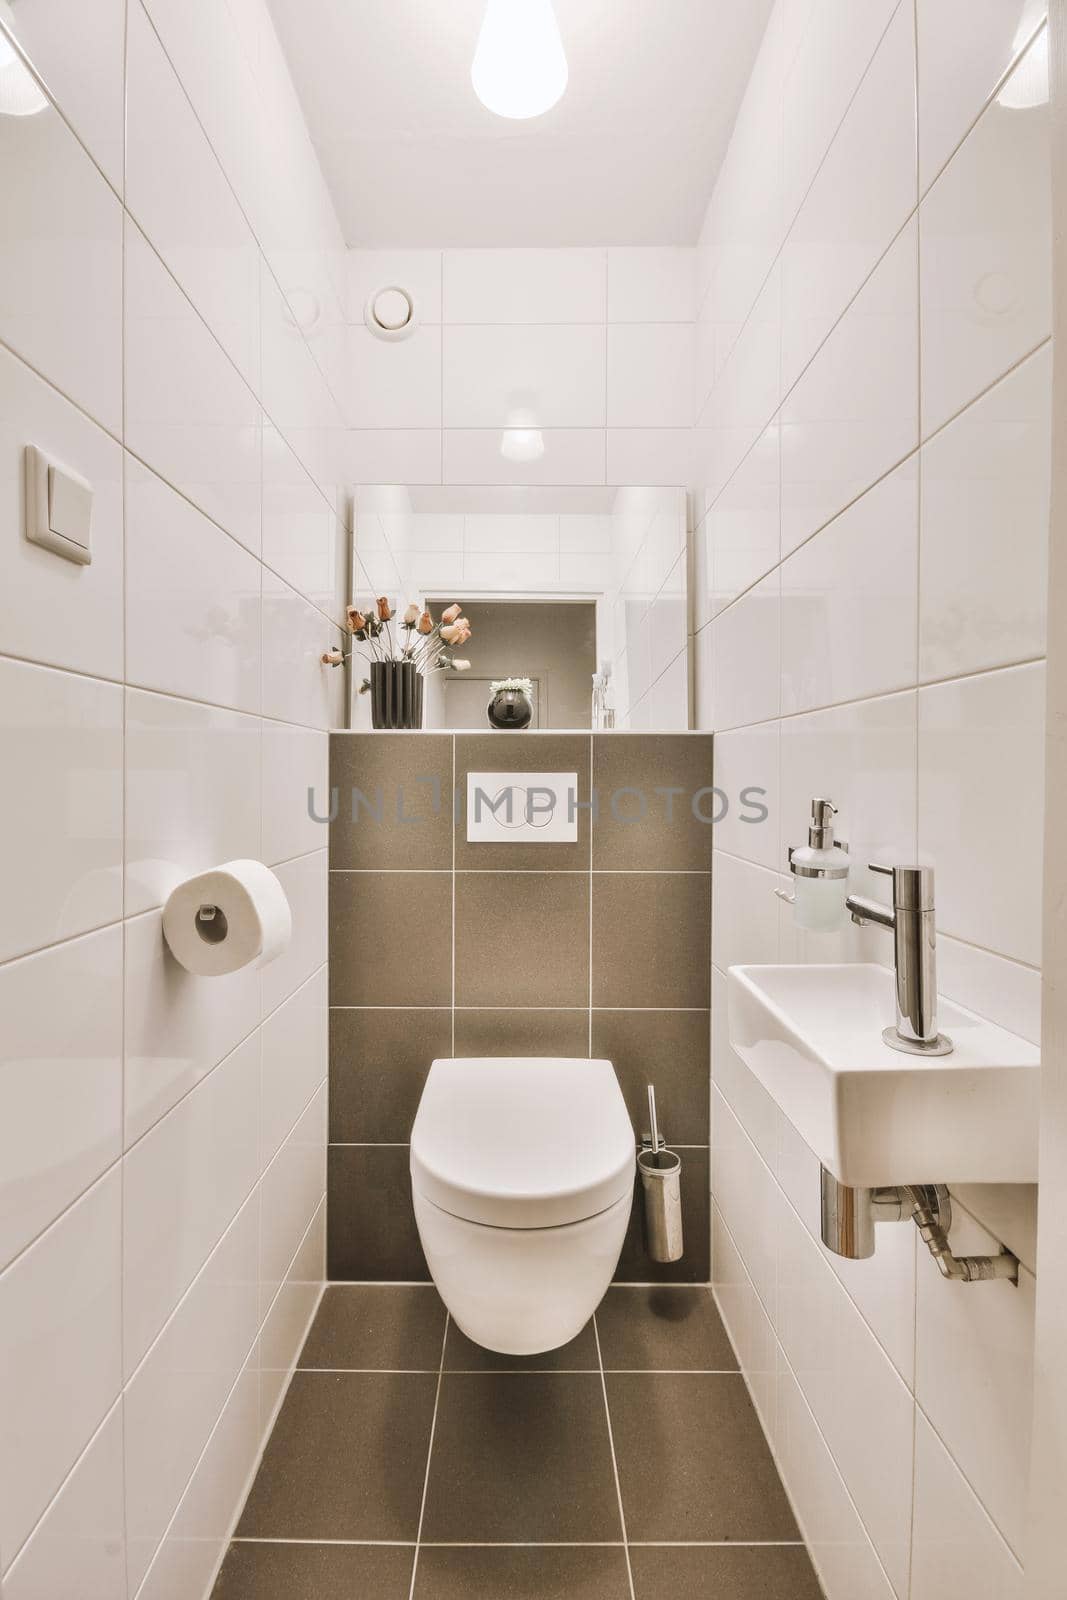 Narrow toilet room with minimalist design by casamedia